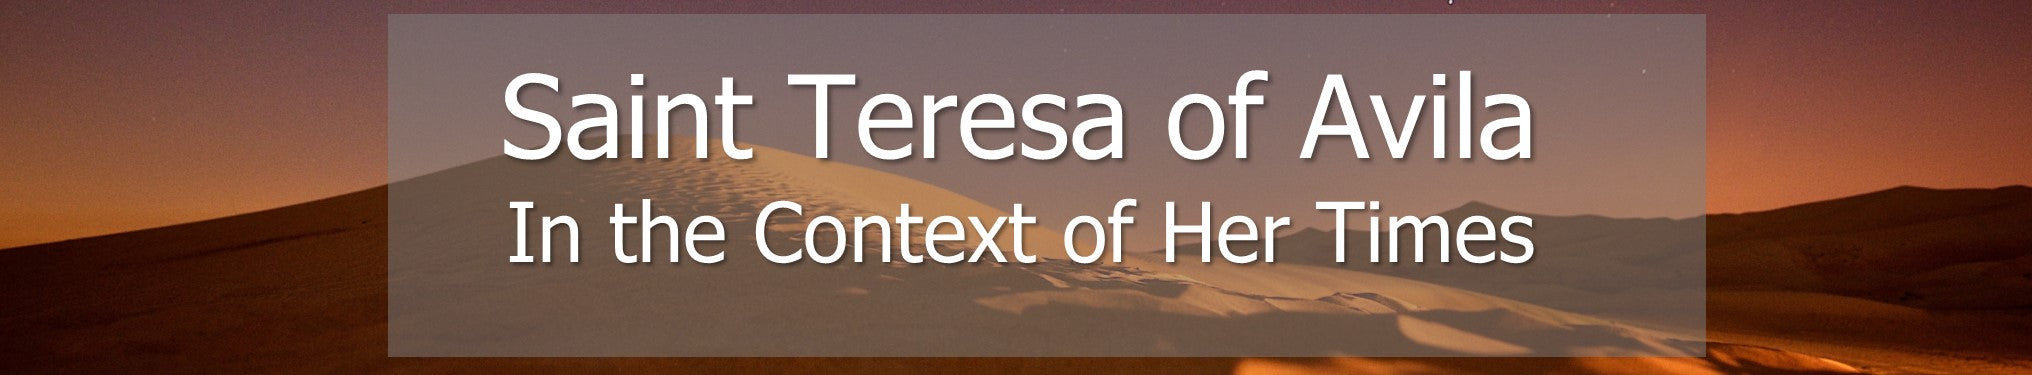 Saint Teresa of Avila - In the Context of Her Times